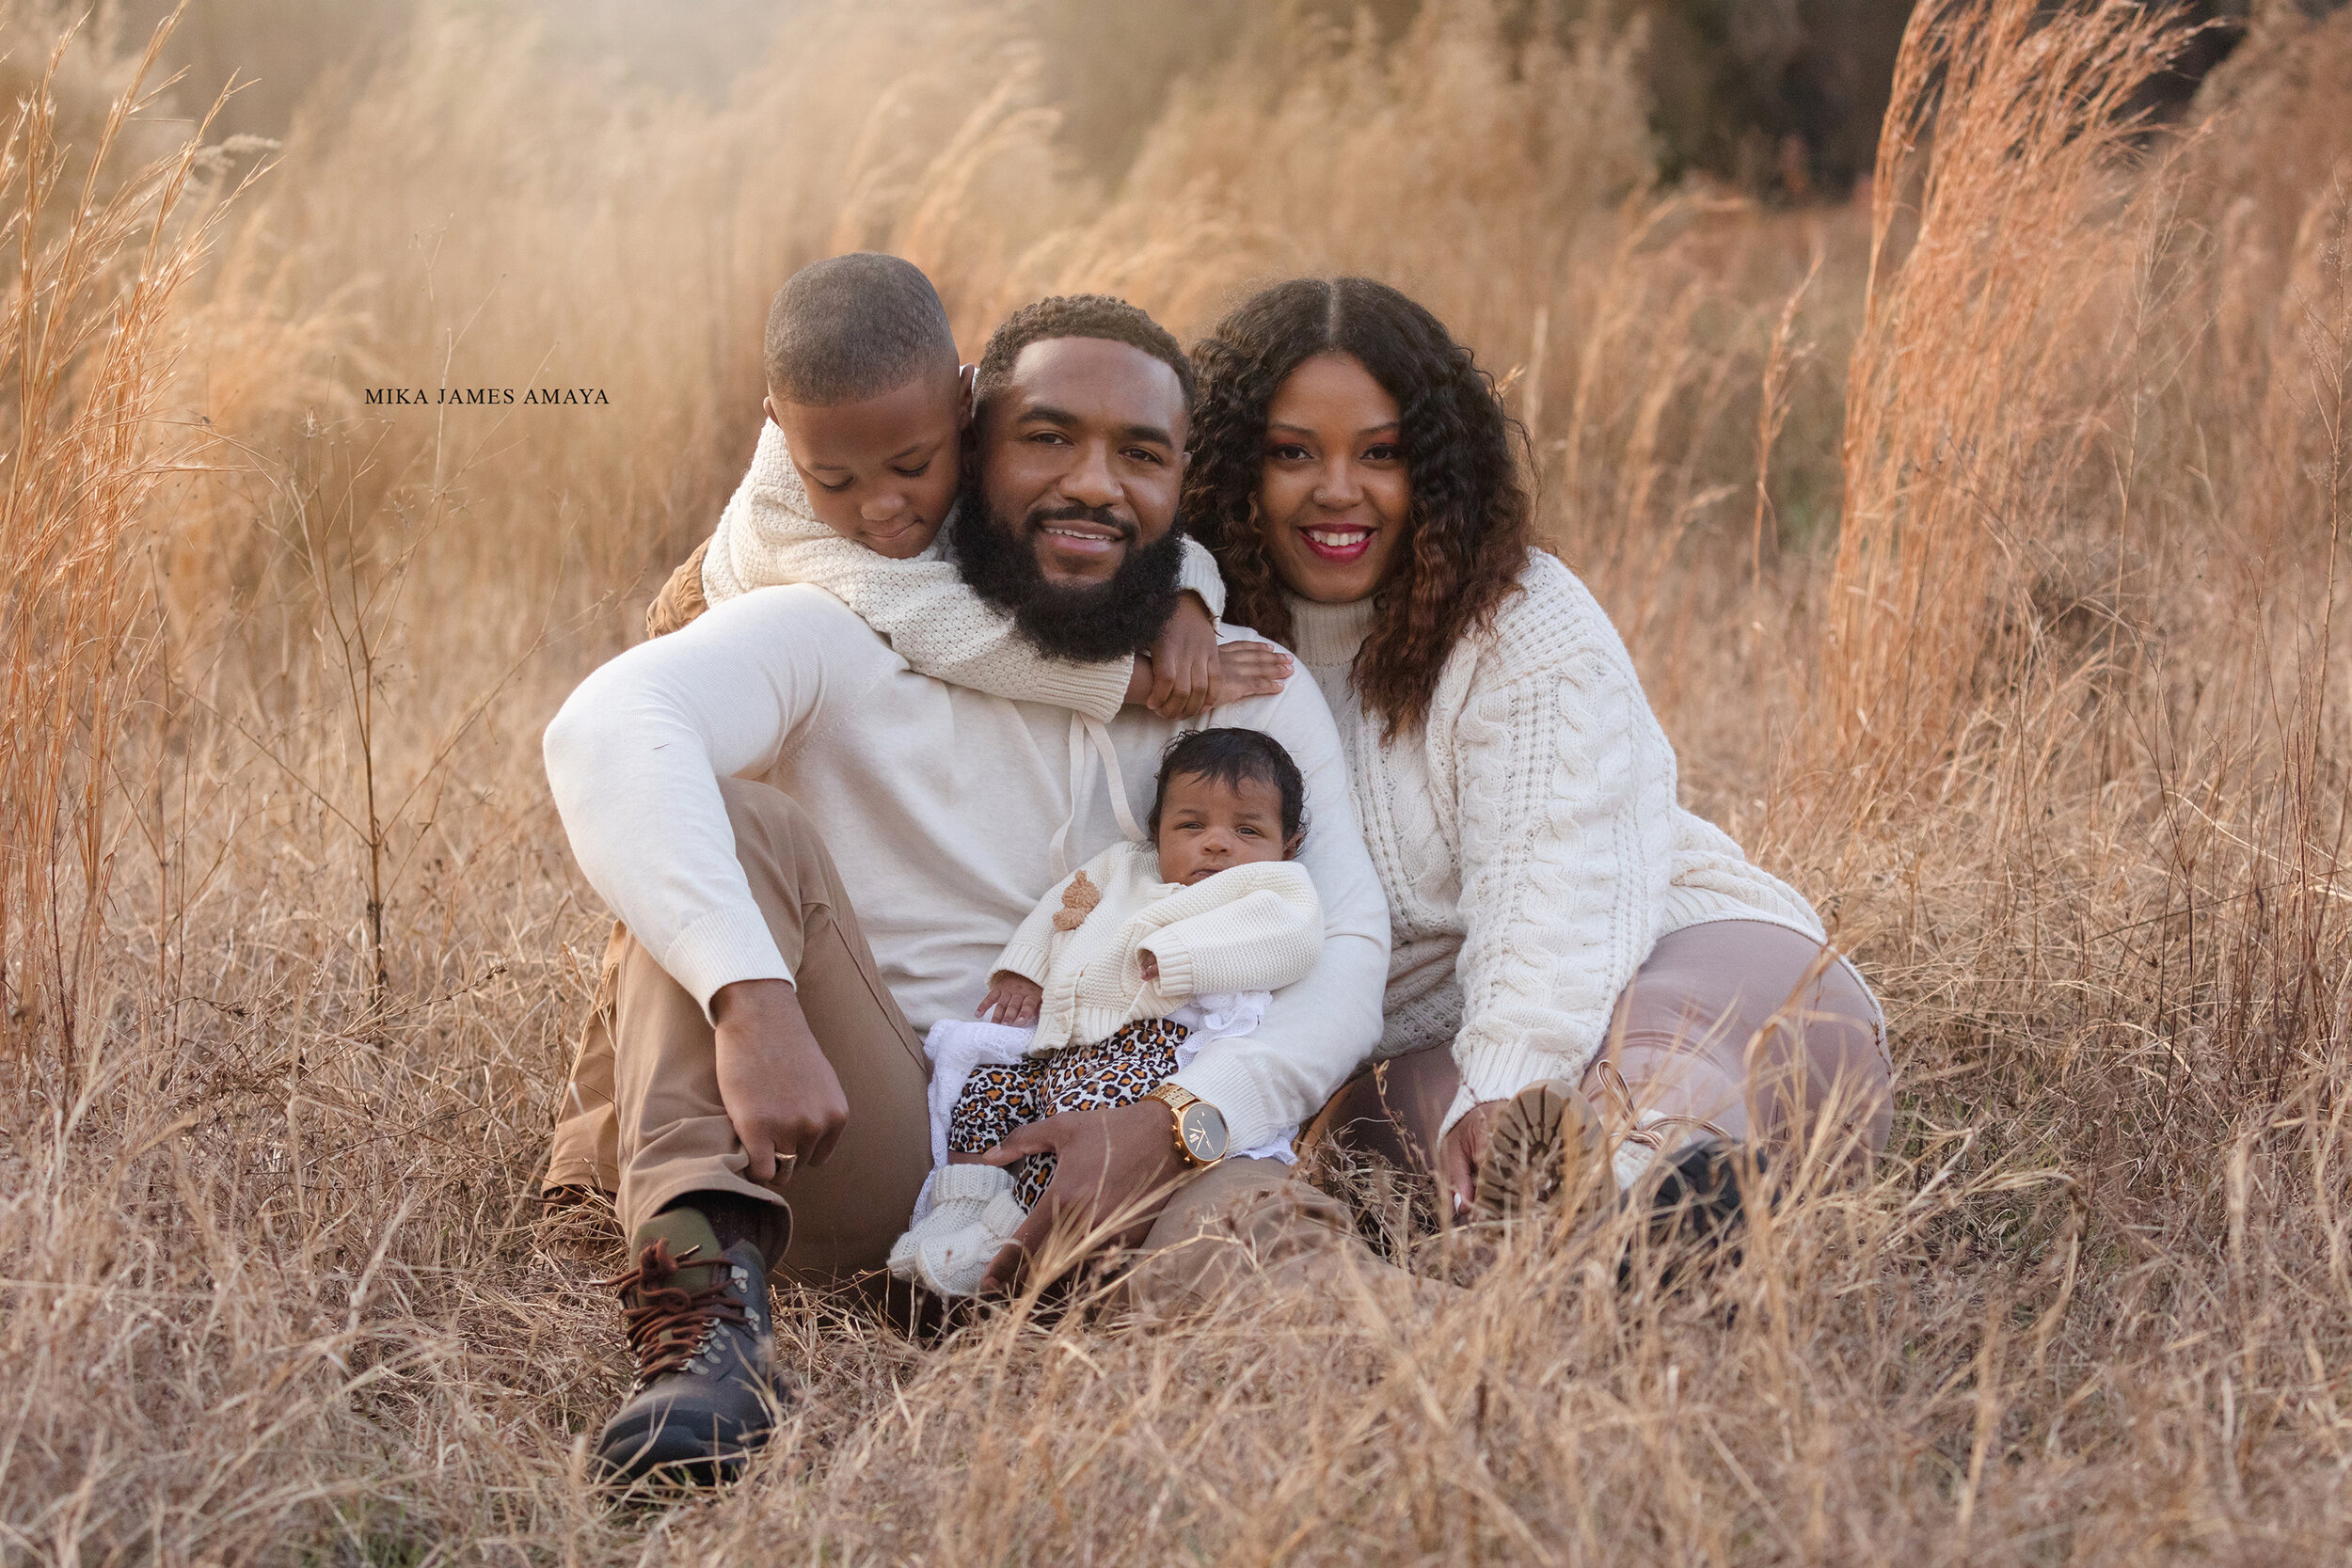 durham family photo session / raleigh - durham organic, natural portrait session at golden hour